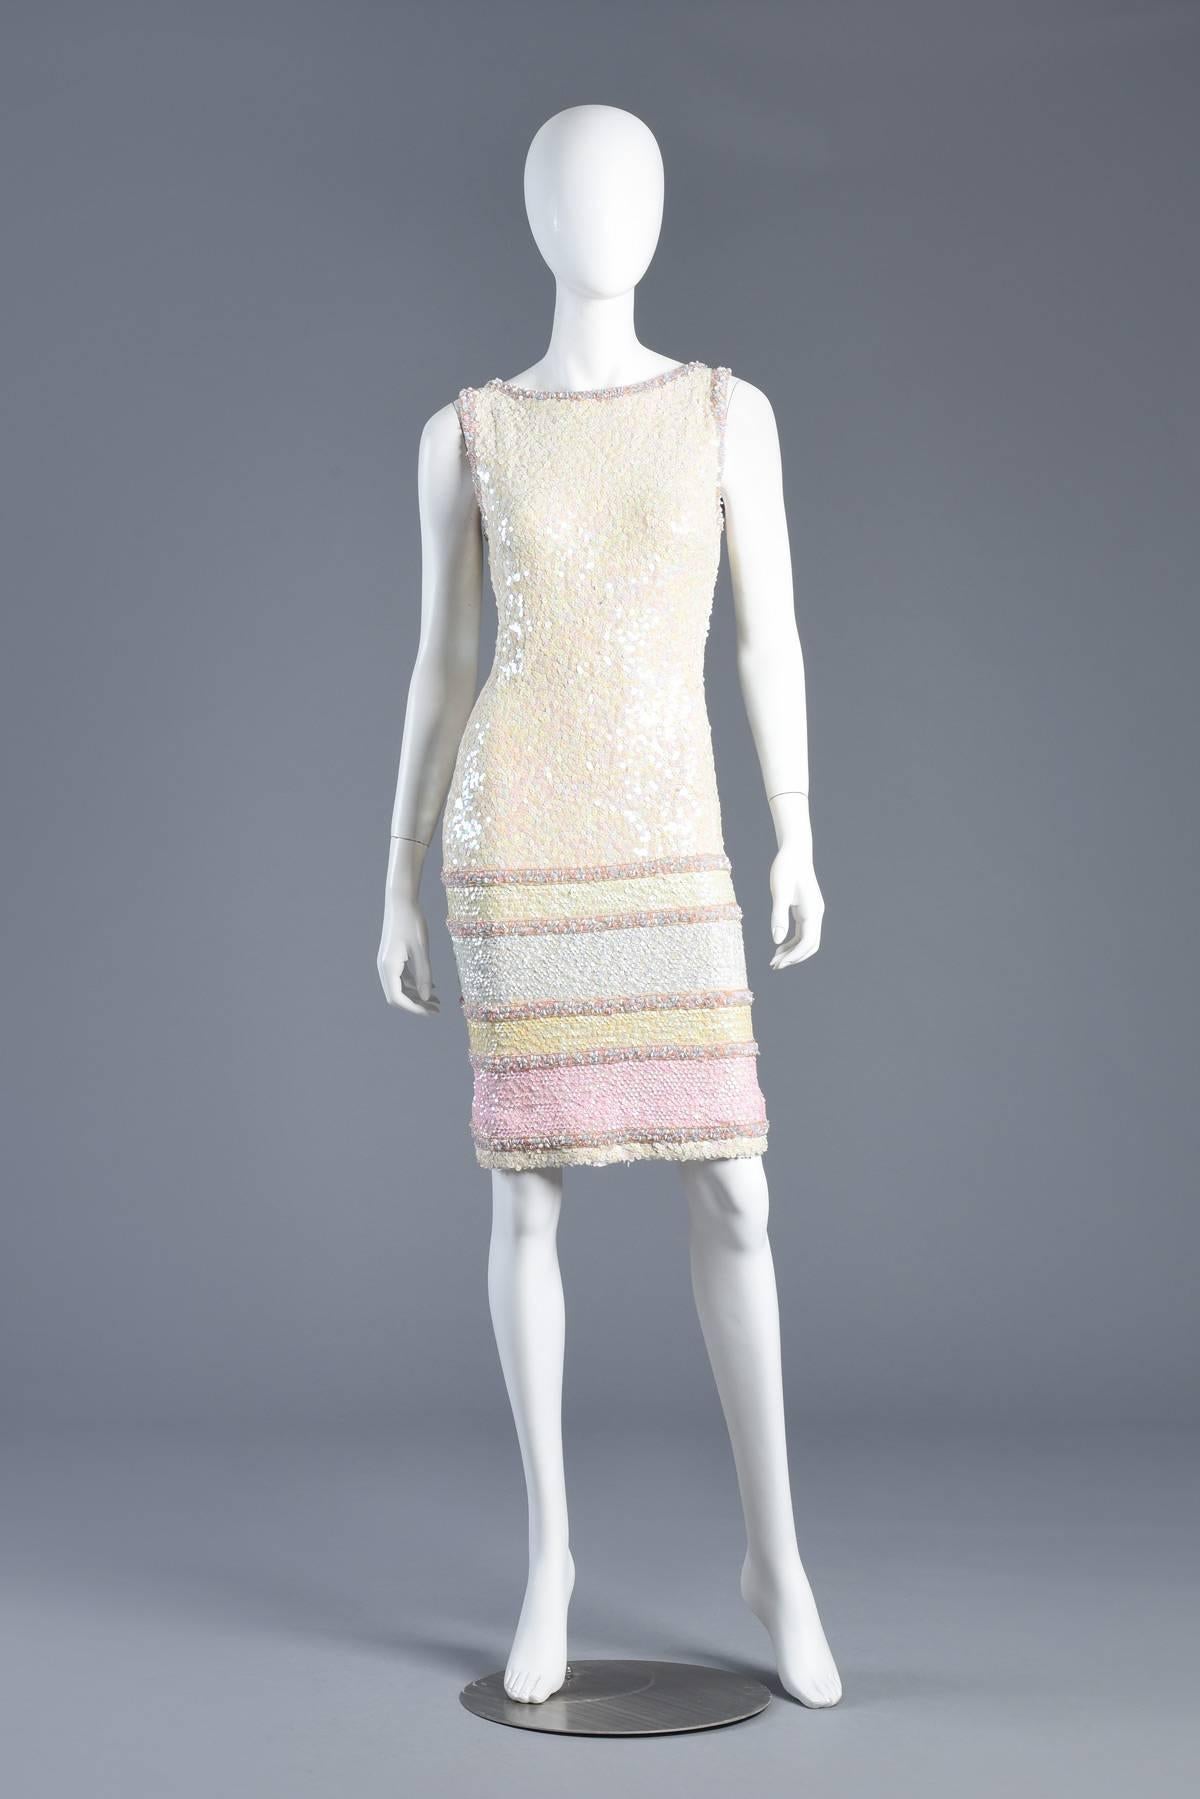 Knockout vintage 1960s sequin encrusted cocktail dress. The perfect Spring dress or Easter get-up. Knit wool ivory dress fully encrusted with pearlescent sequins with pastel colorblock sequin + beaded striping on skirt. Metal zipper in back.